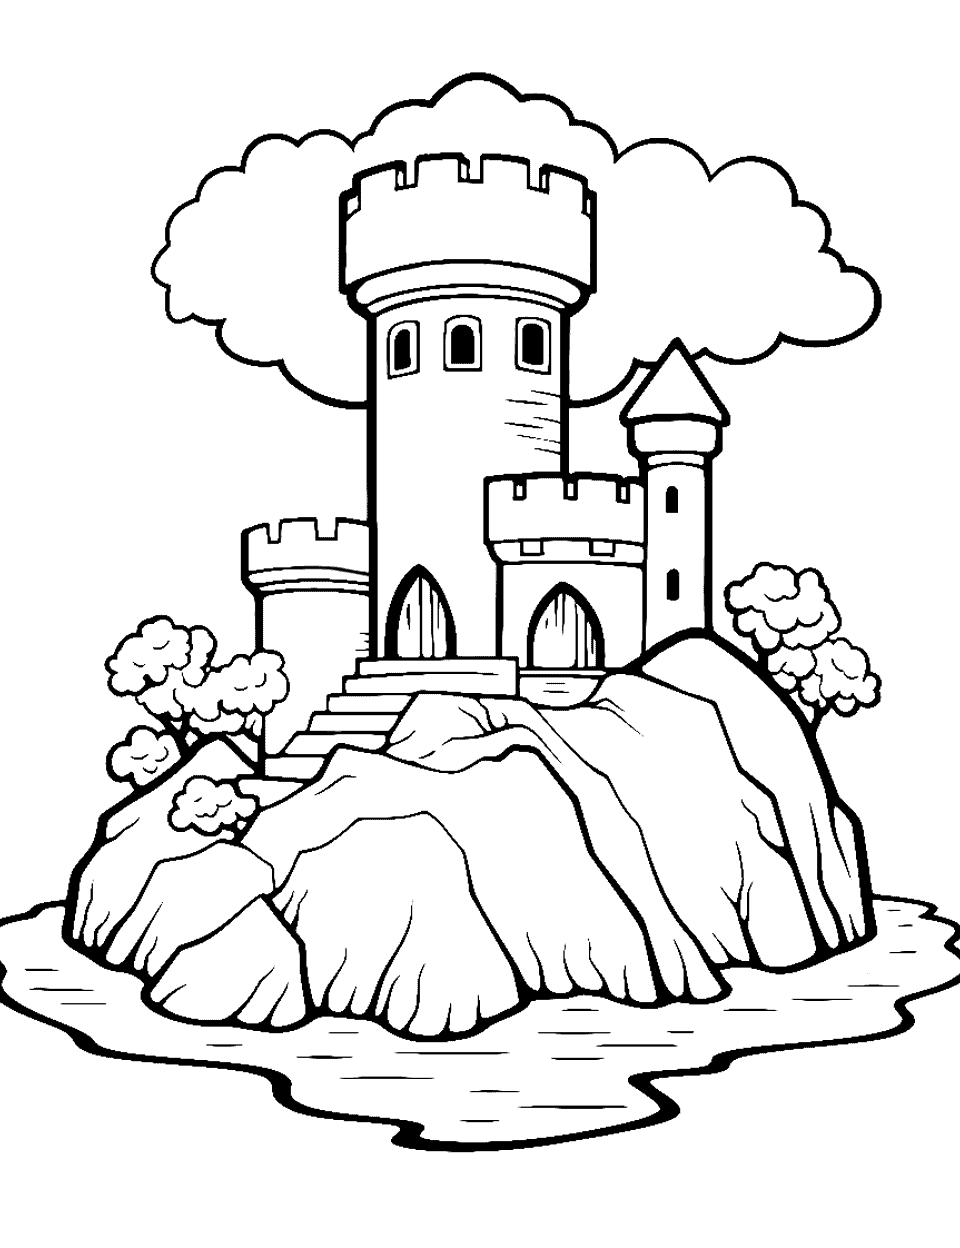 Irish Castle on a Hill Coloring Page - A distant Irish castle set upon a hill.